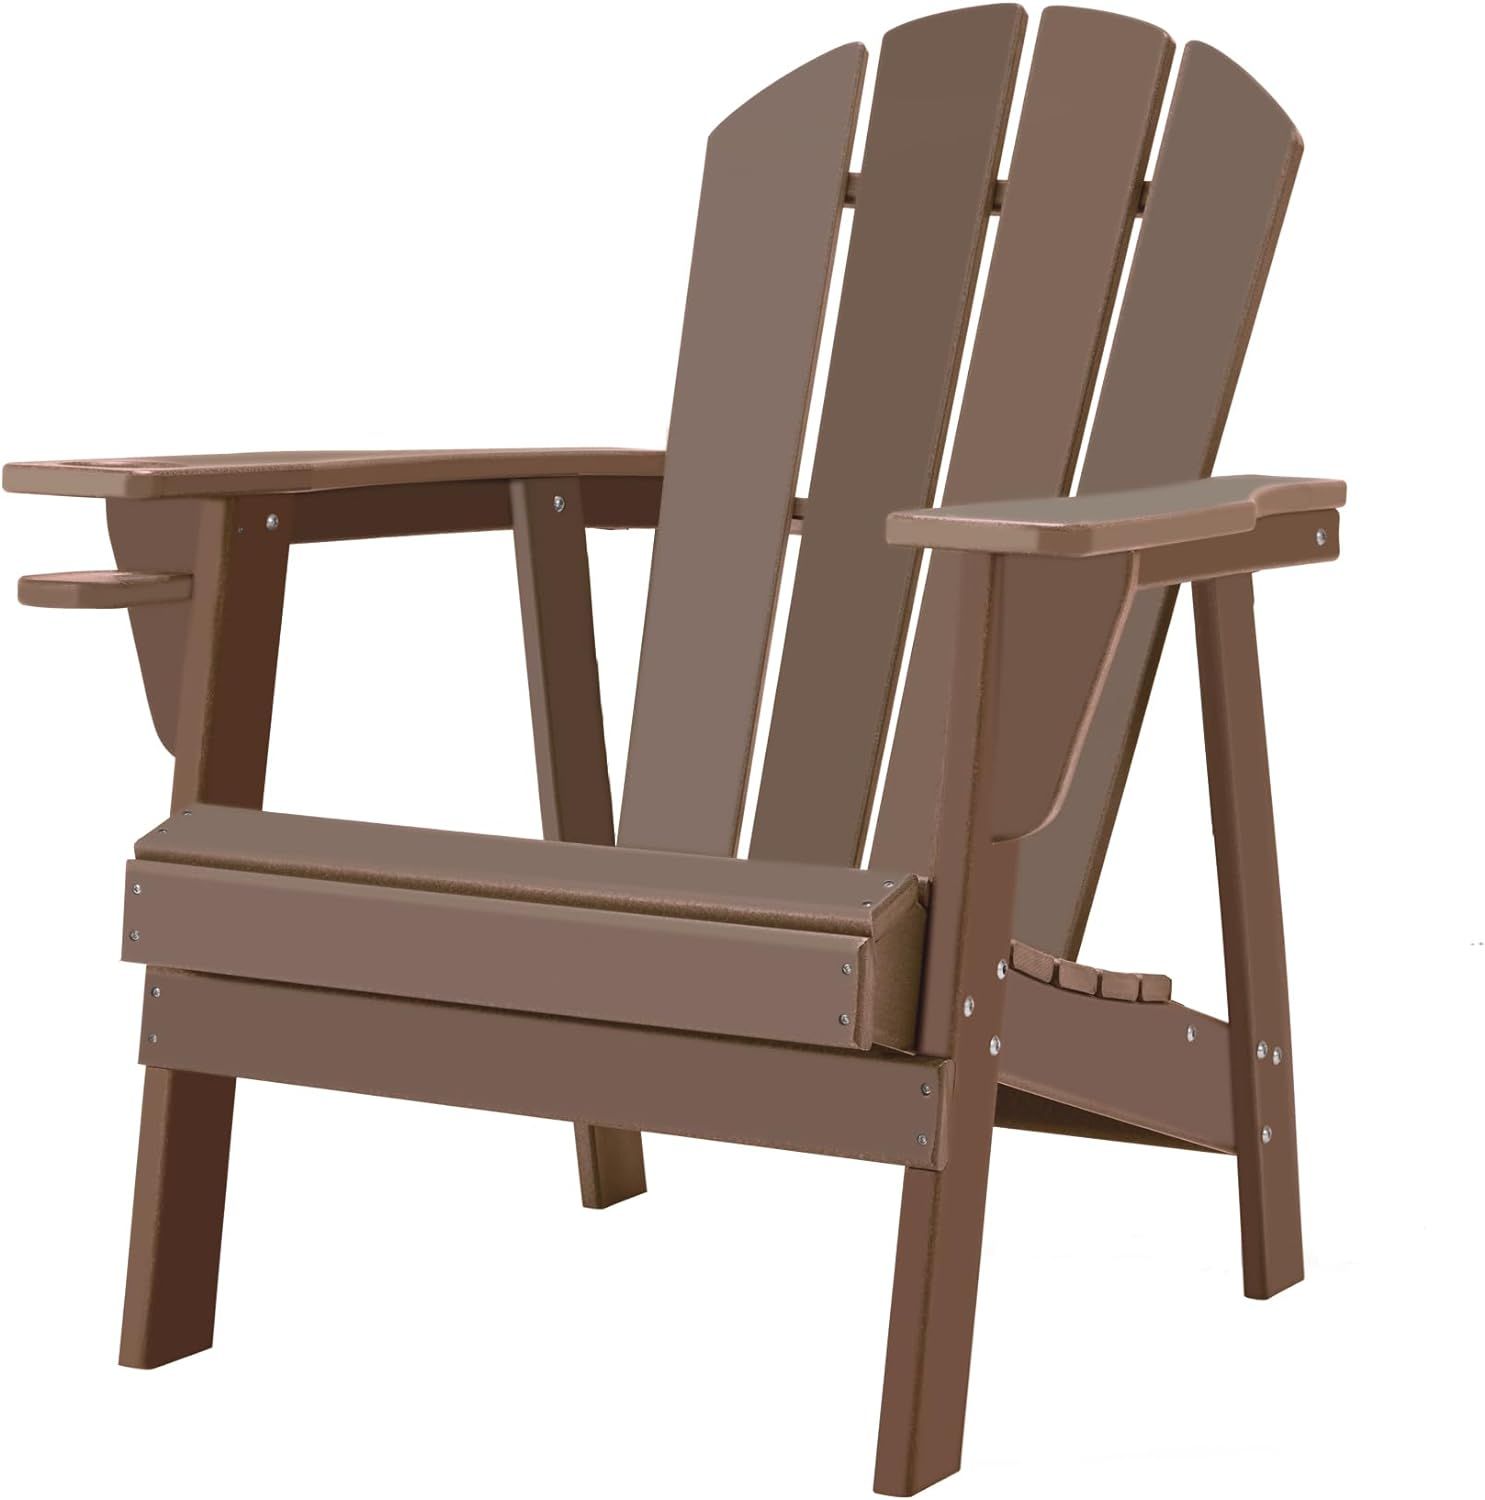 Adirondack Chairs, HDPE All-Weather Adirondack Chair, Fire Pit Chair (Classic, Teak) | Amazon (US)